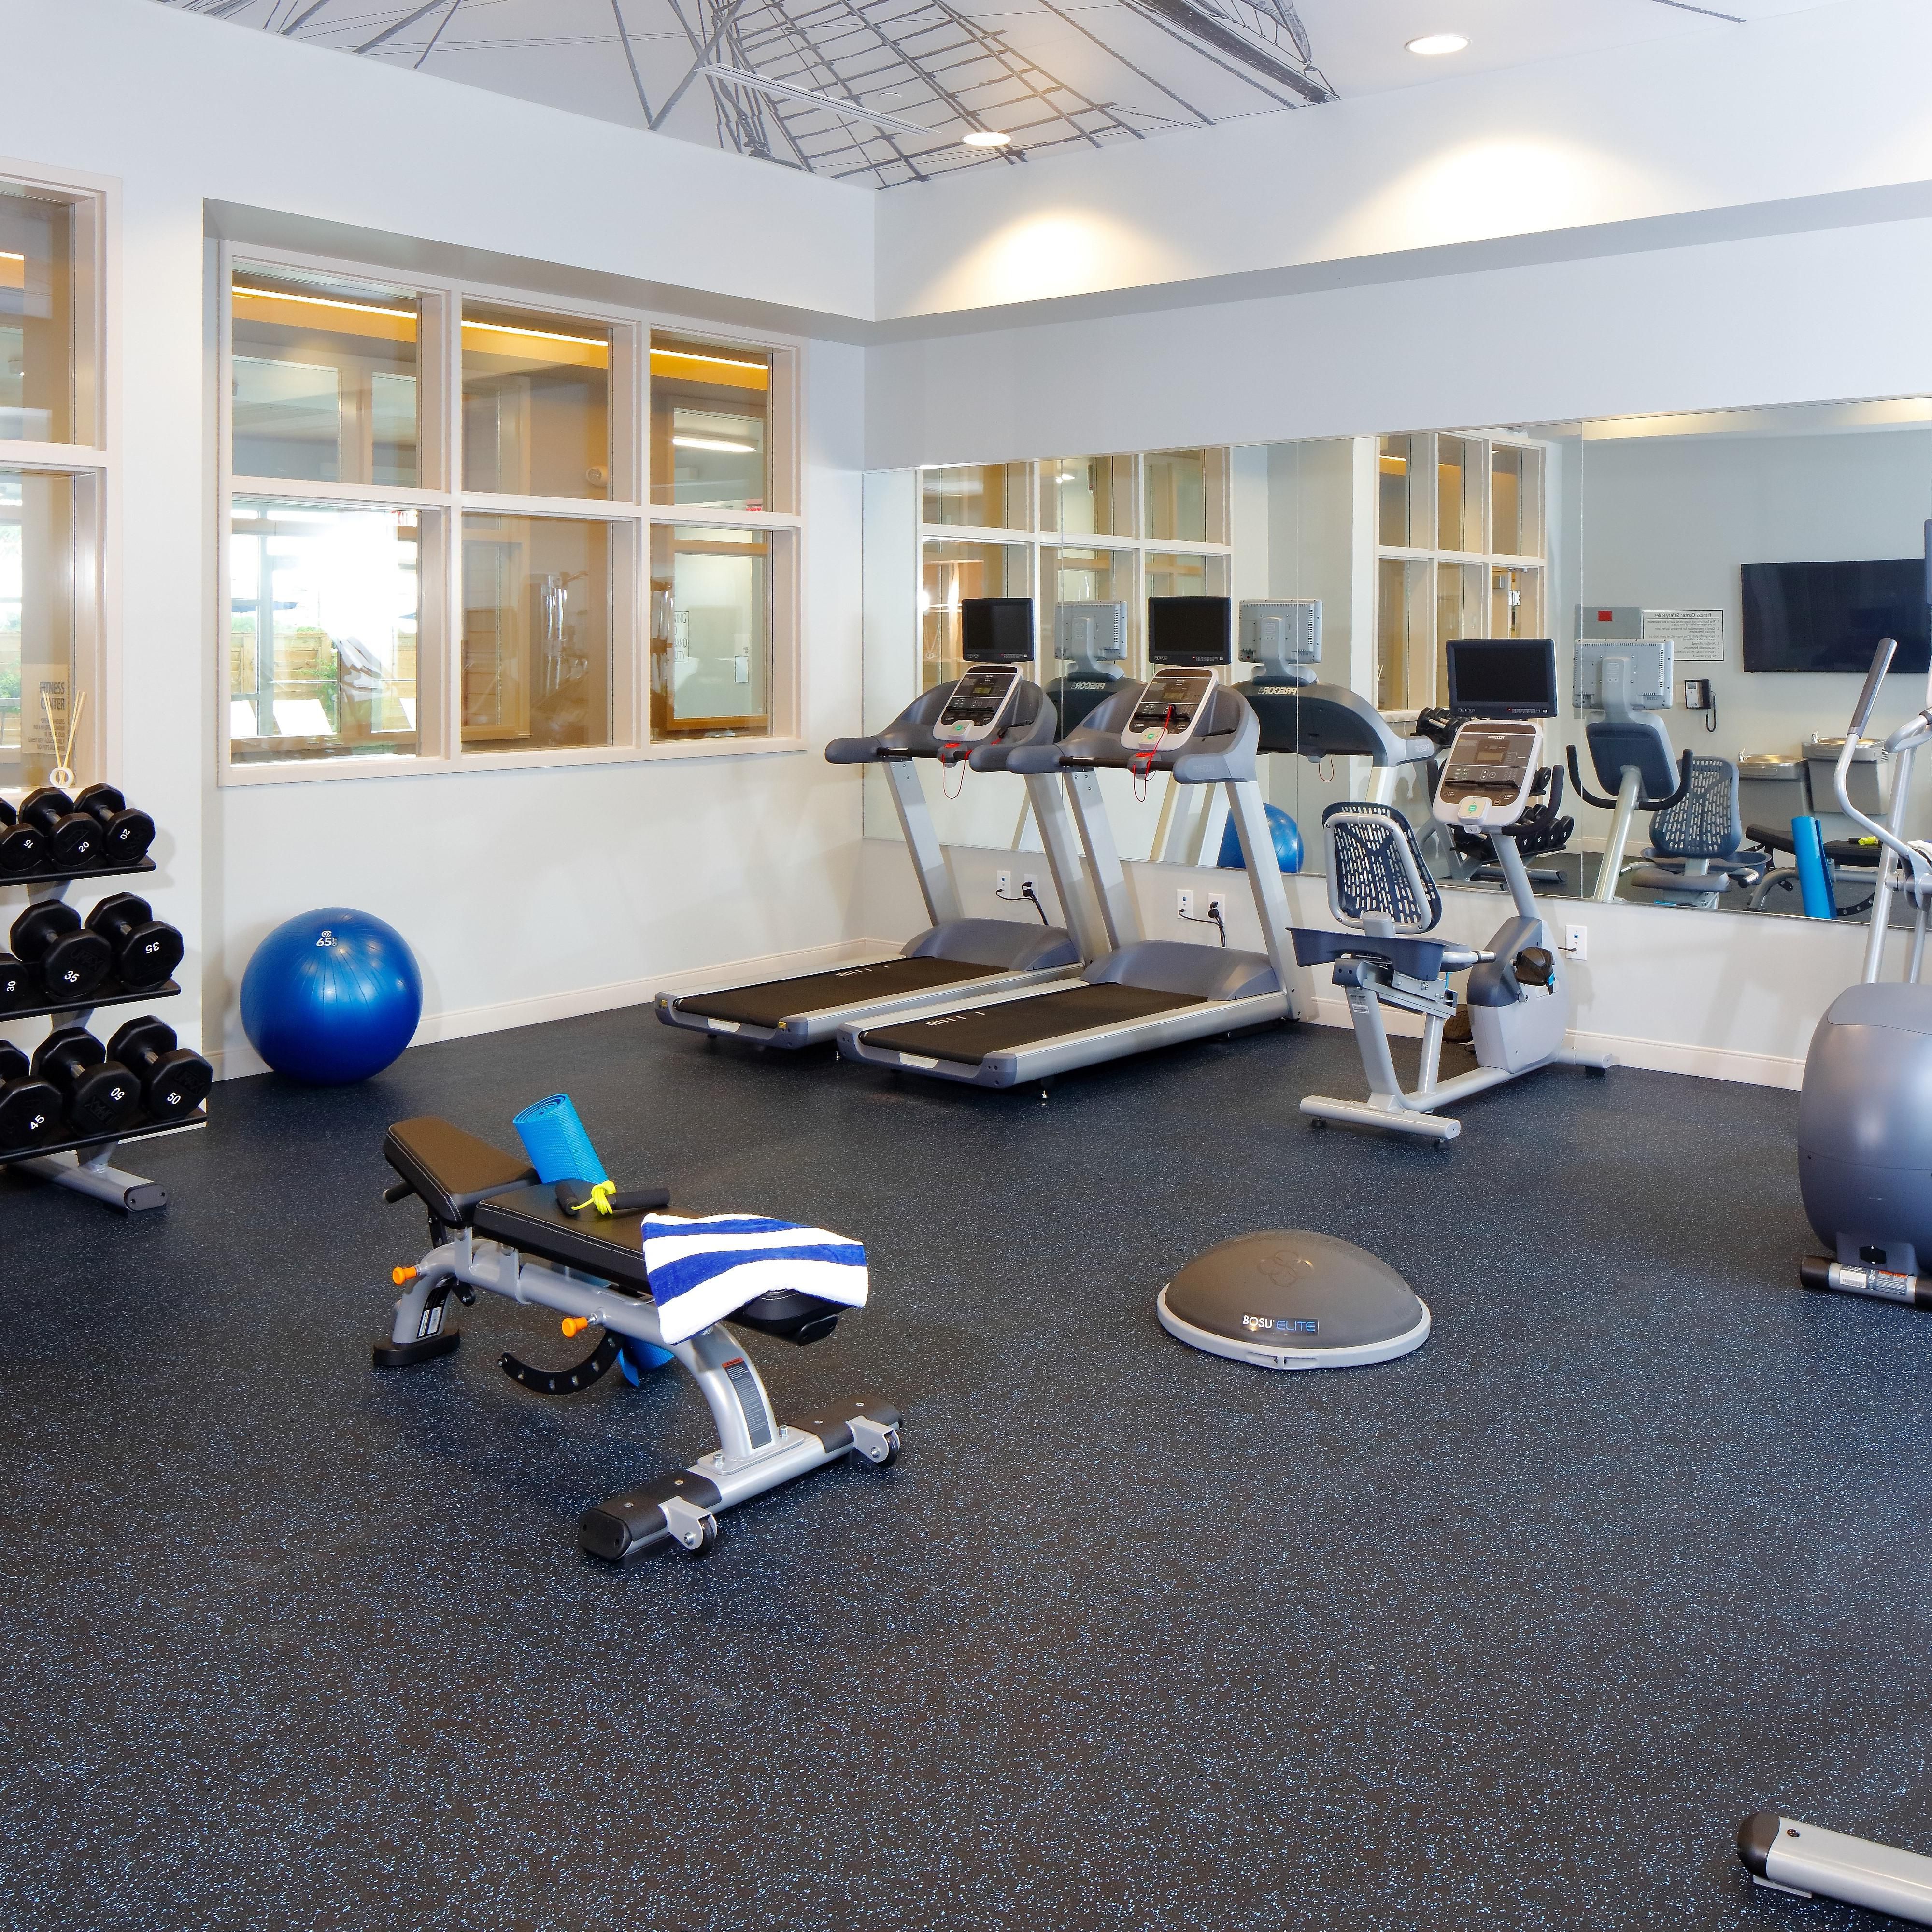 The hotel fitness center is open 24 hours for hotel guests